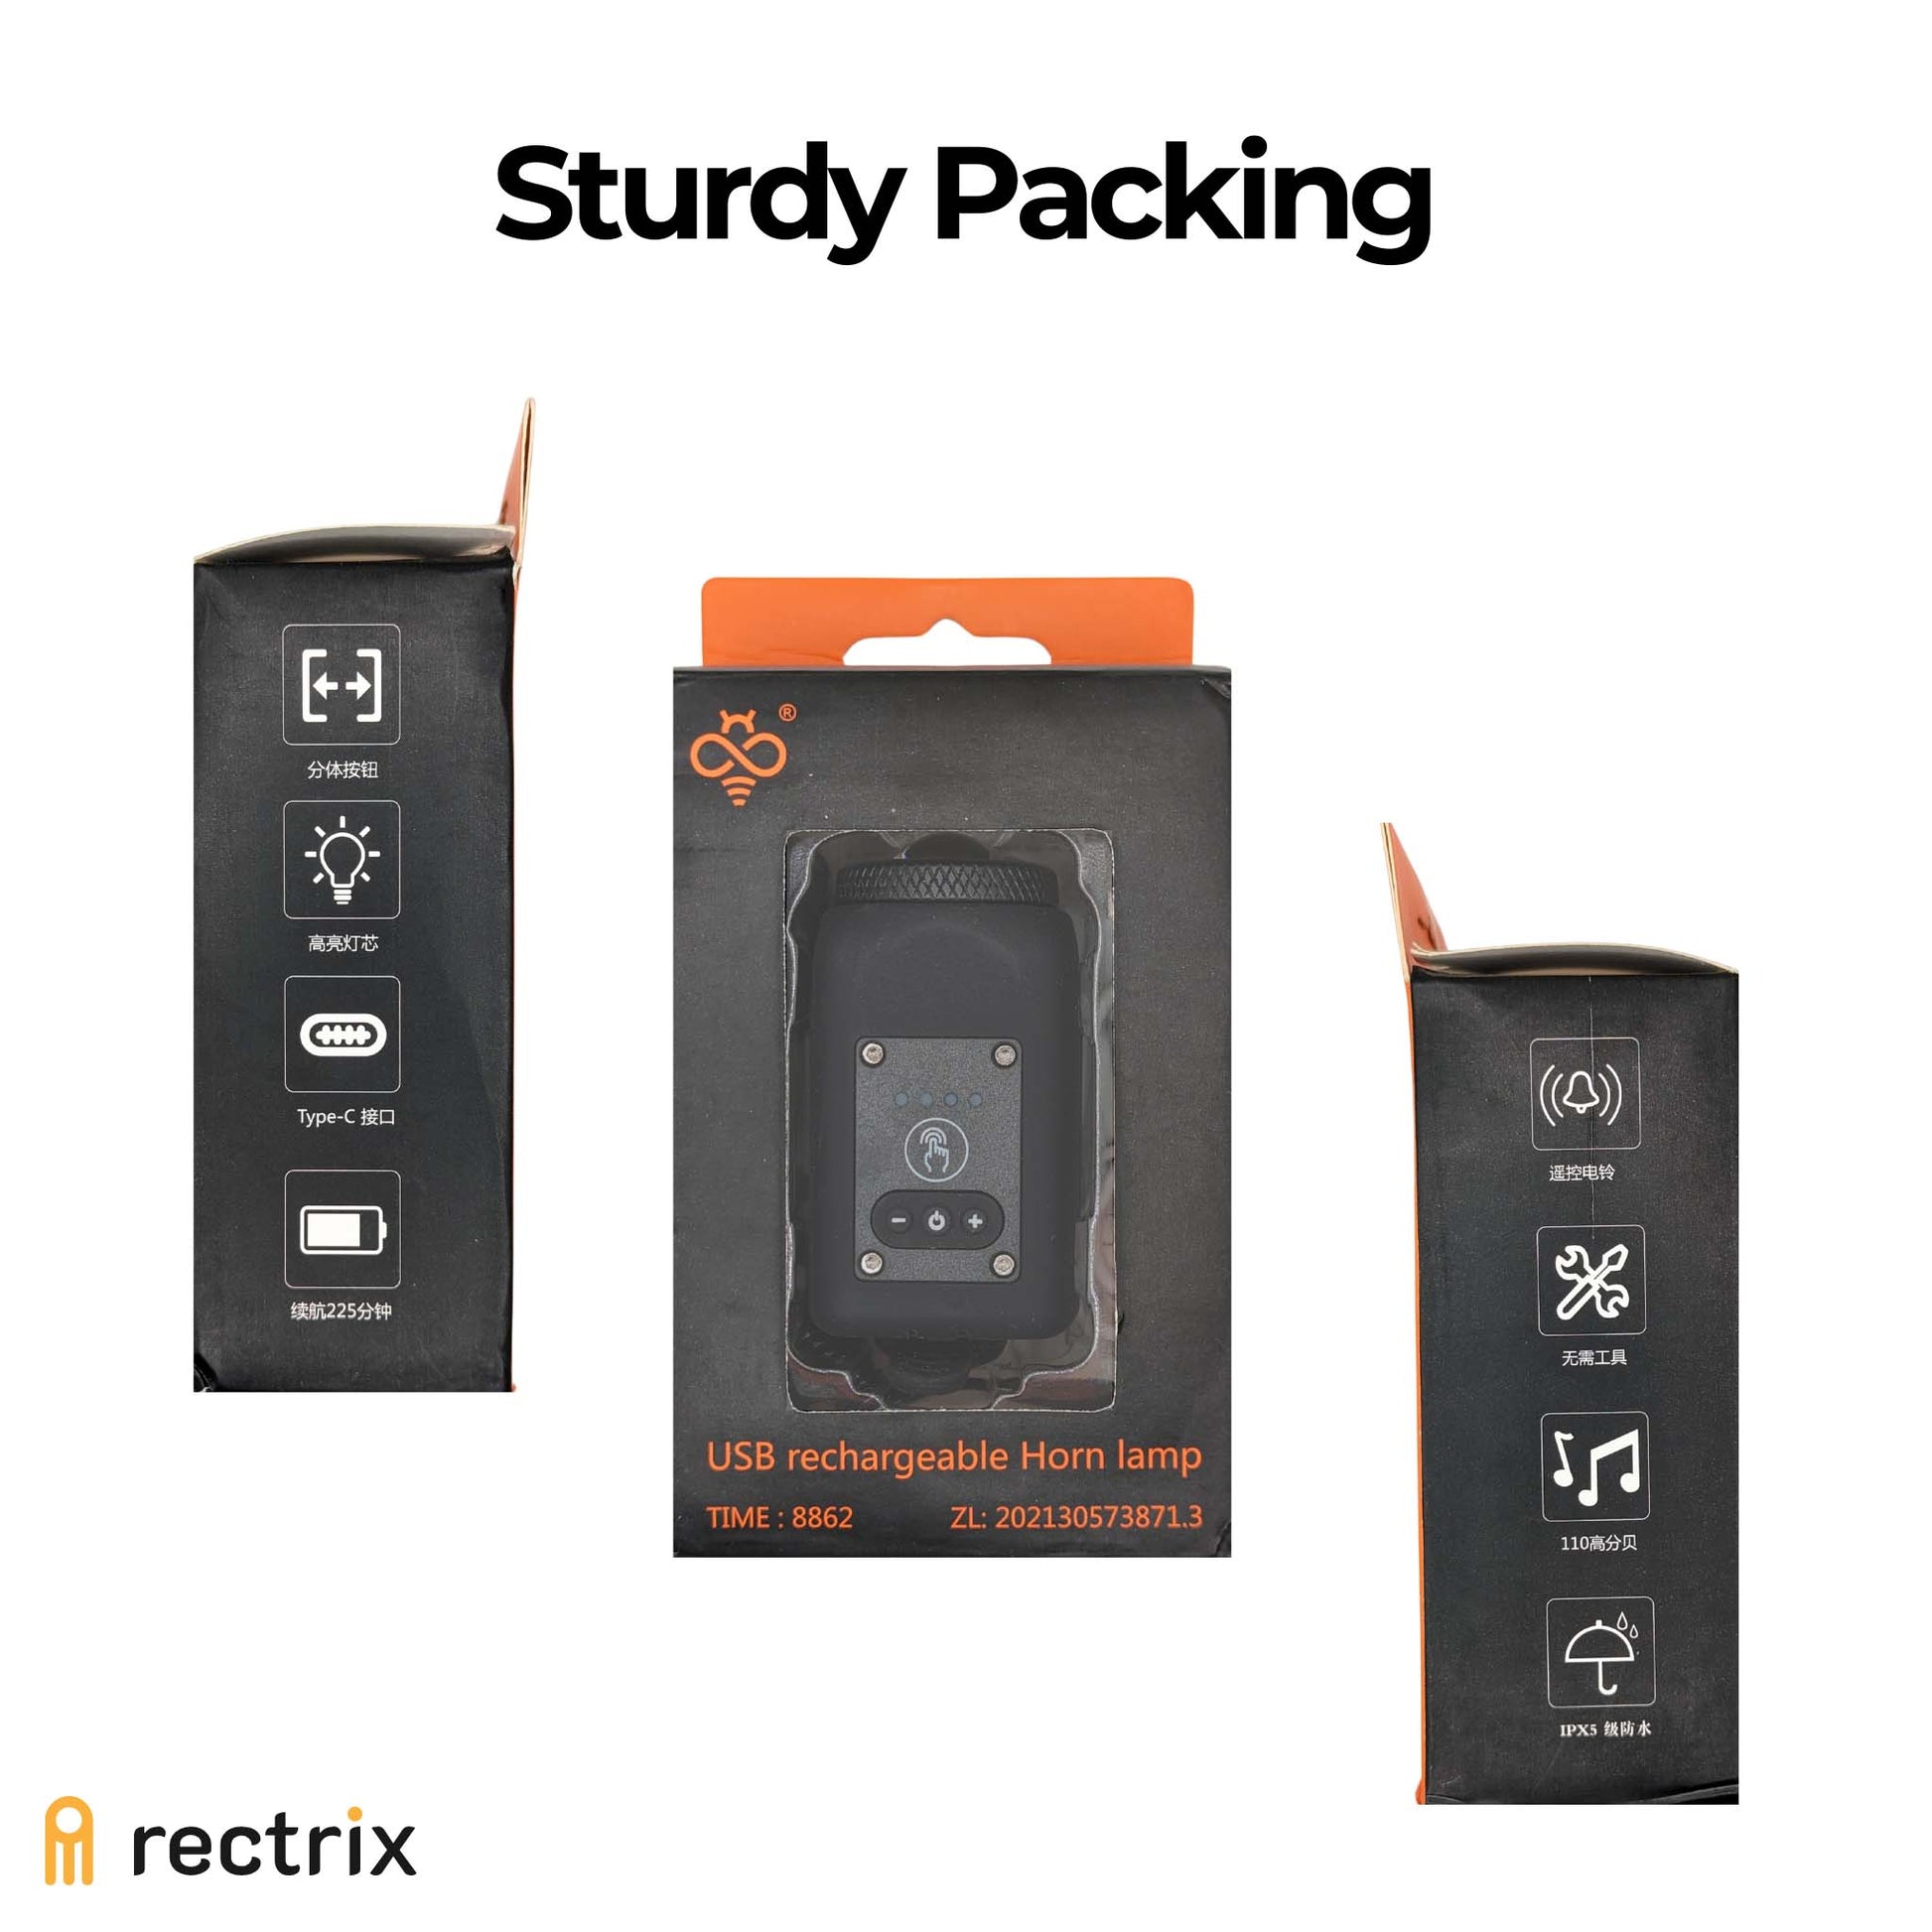 Front and side views of the product's packaging